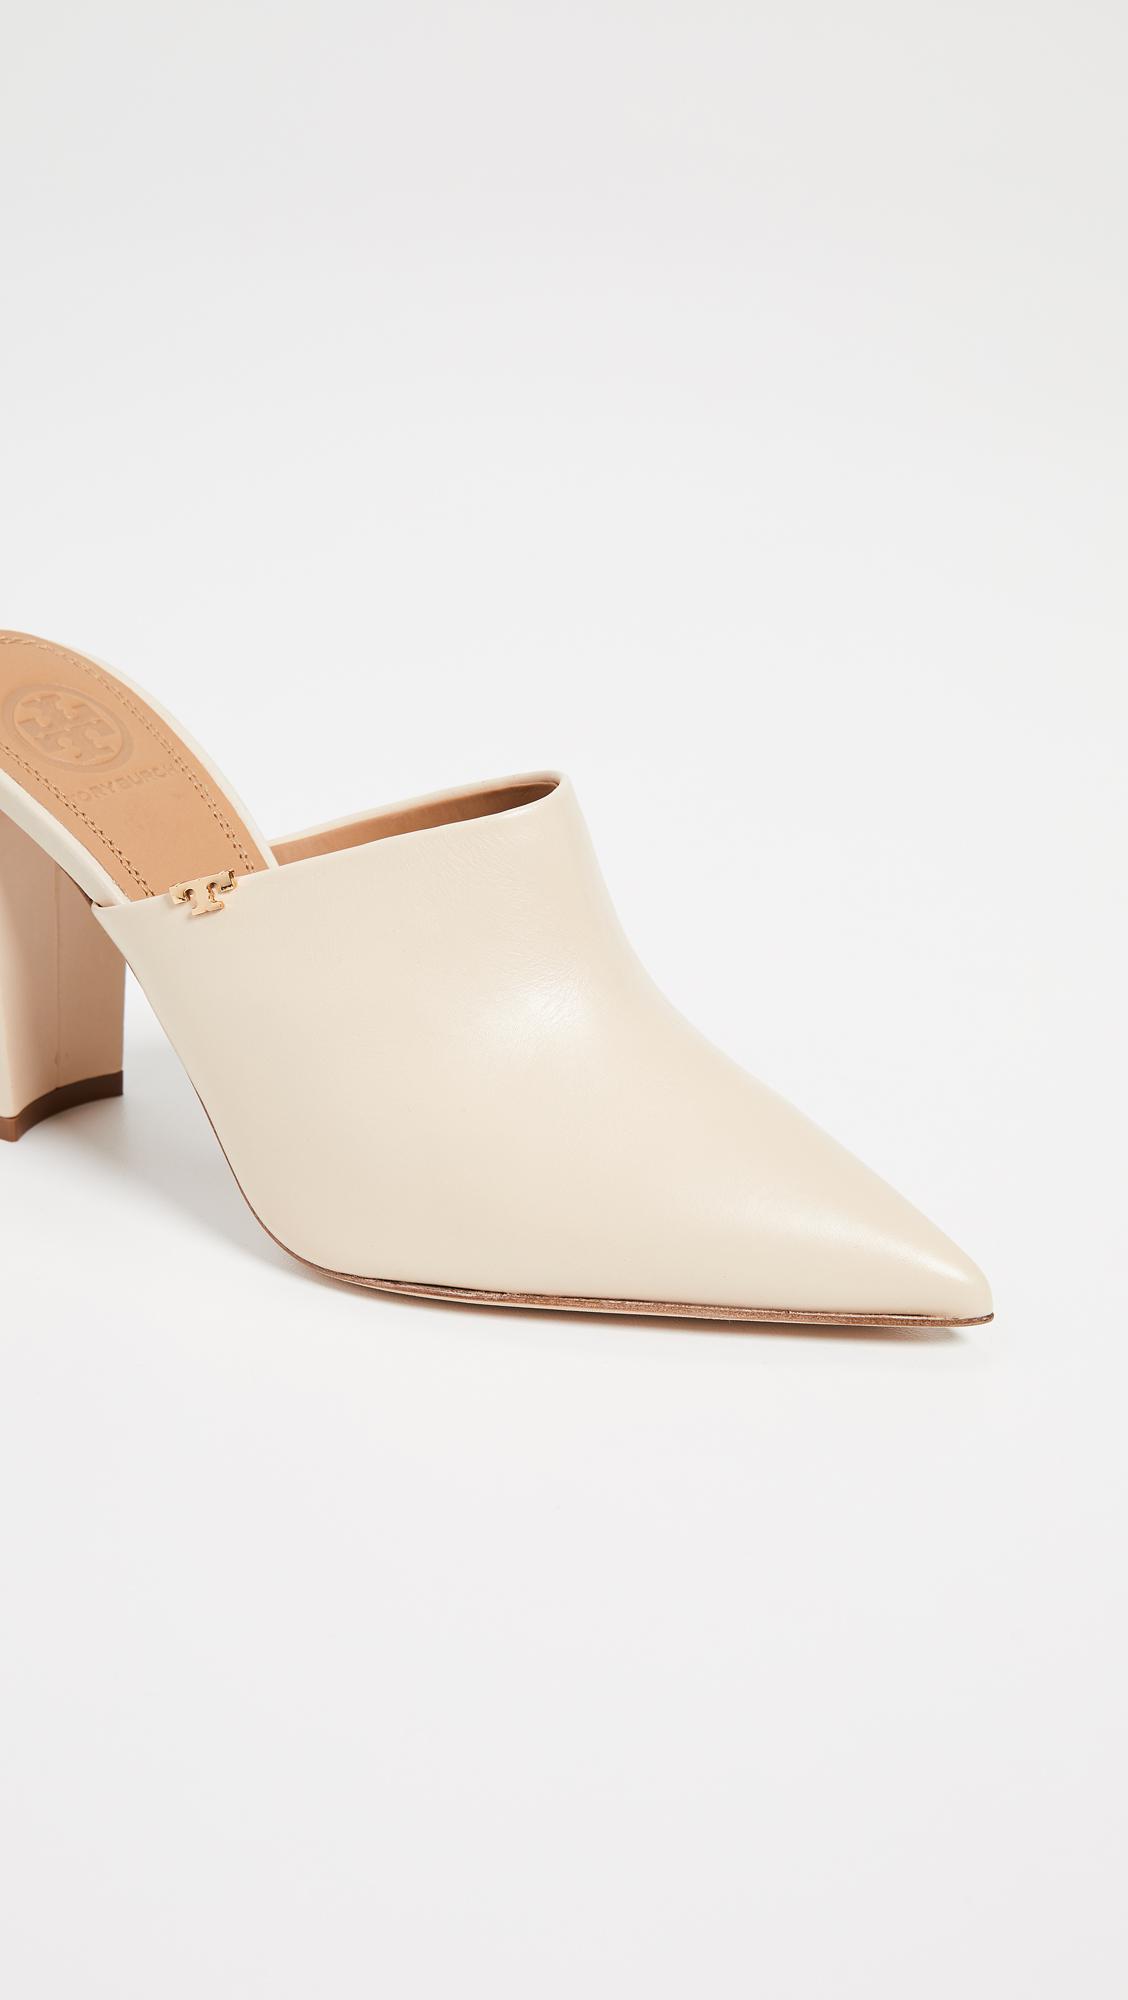 Tory Burch Leather Penelope 90mm Mules in Natural - Lyst